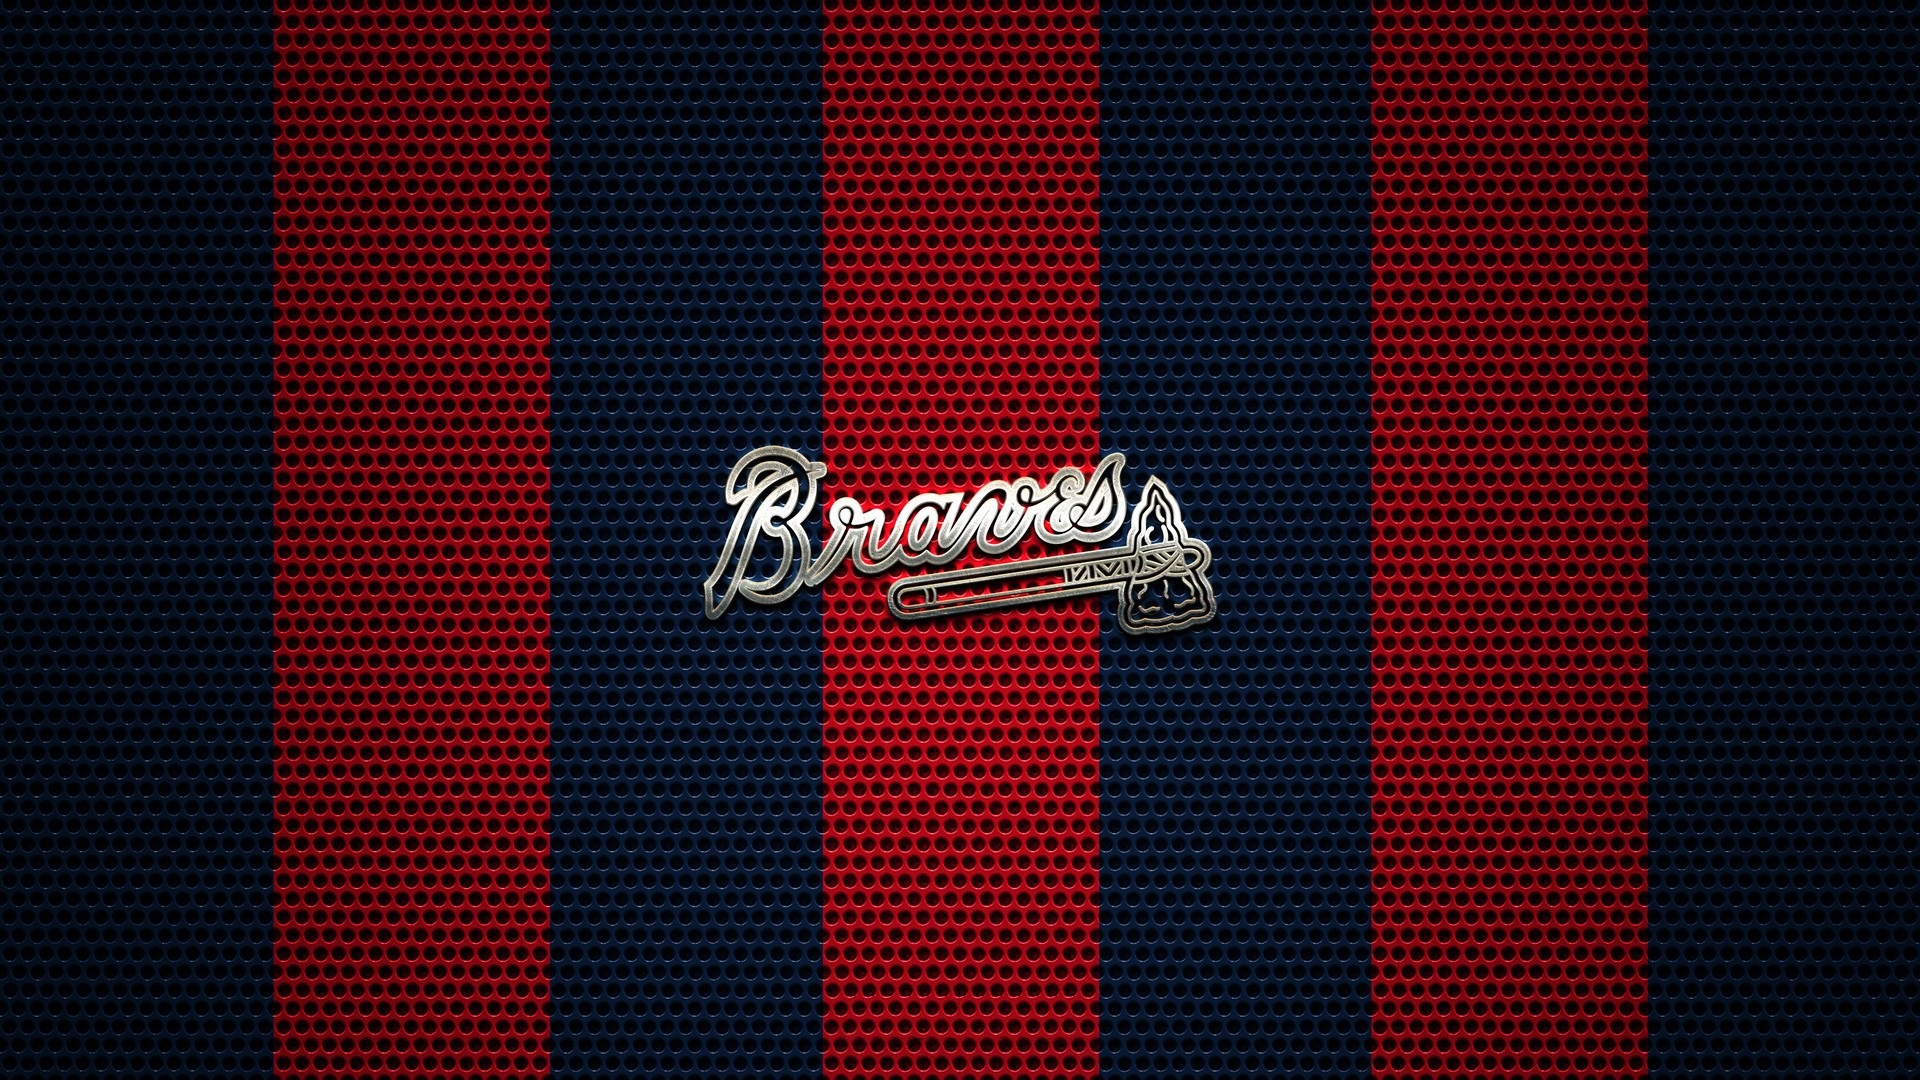 Atlanta Braves Wallpaper For Mac Wallpaper with high-resolution 1920x1080 pixel. You can use this wallpaper for Mac Desktop Wallpaper, Laptop Screensavers, Android Wallpapers, Tablet or iPhone Home Screen and another mobile phone device